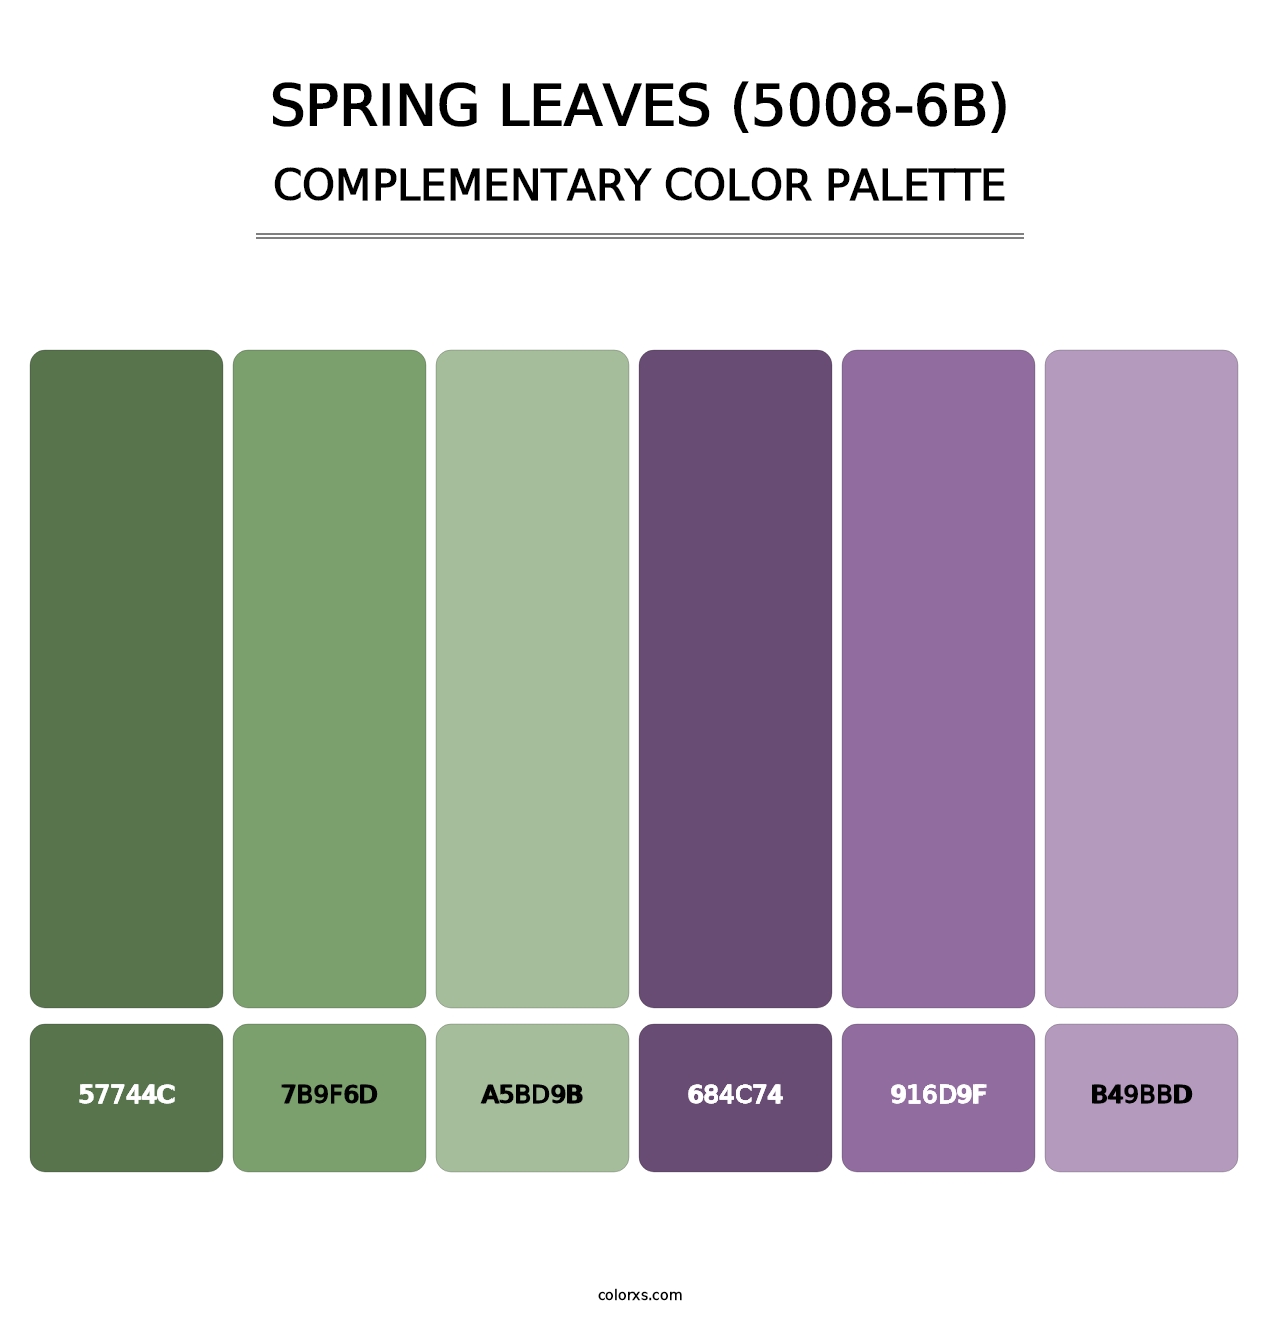 Spring Leaves (5008-6B) - Complementary Color Palette